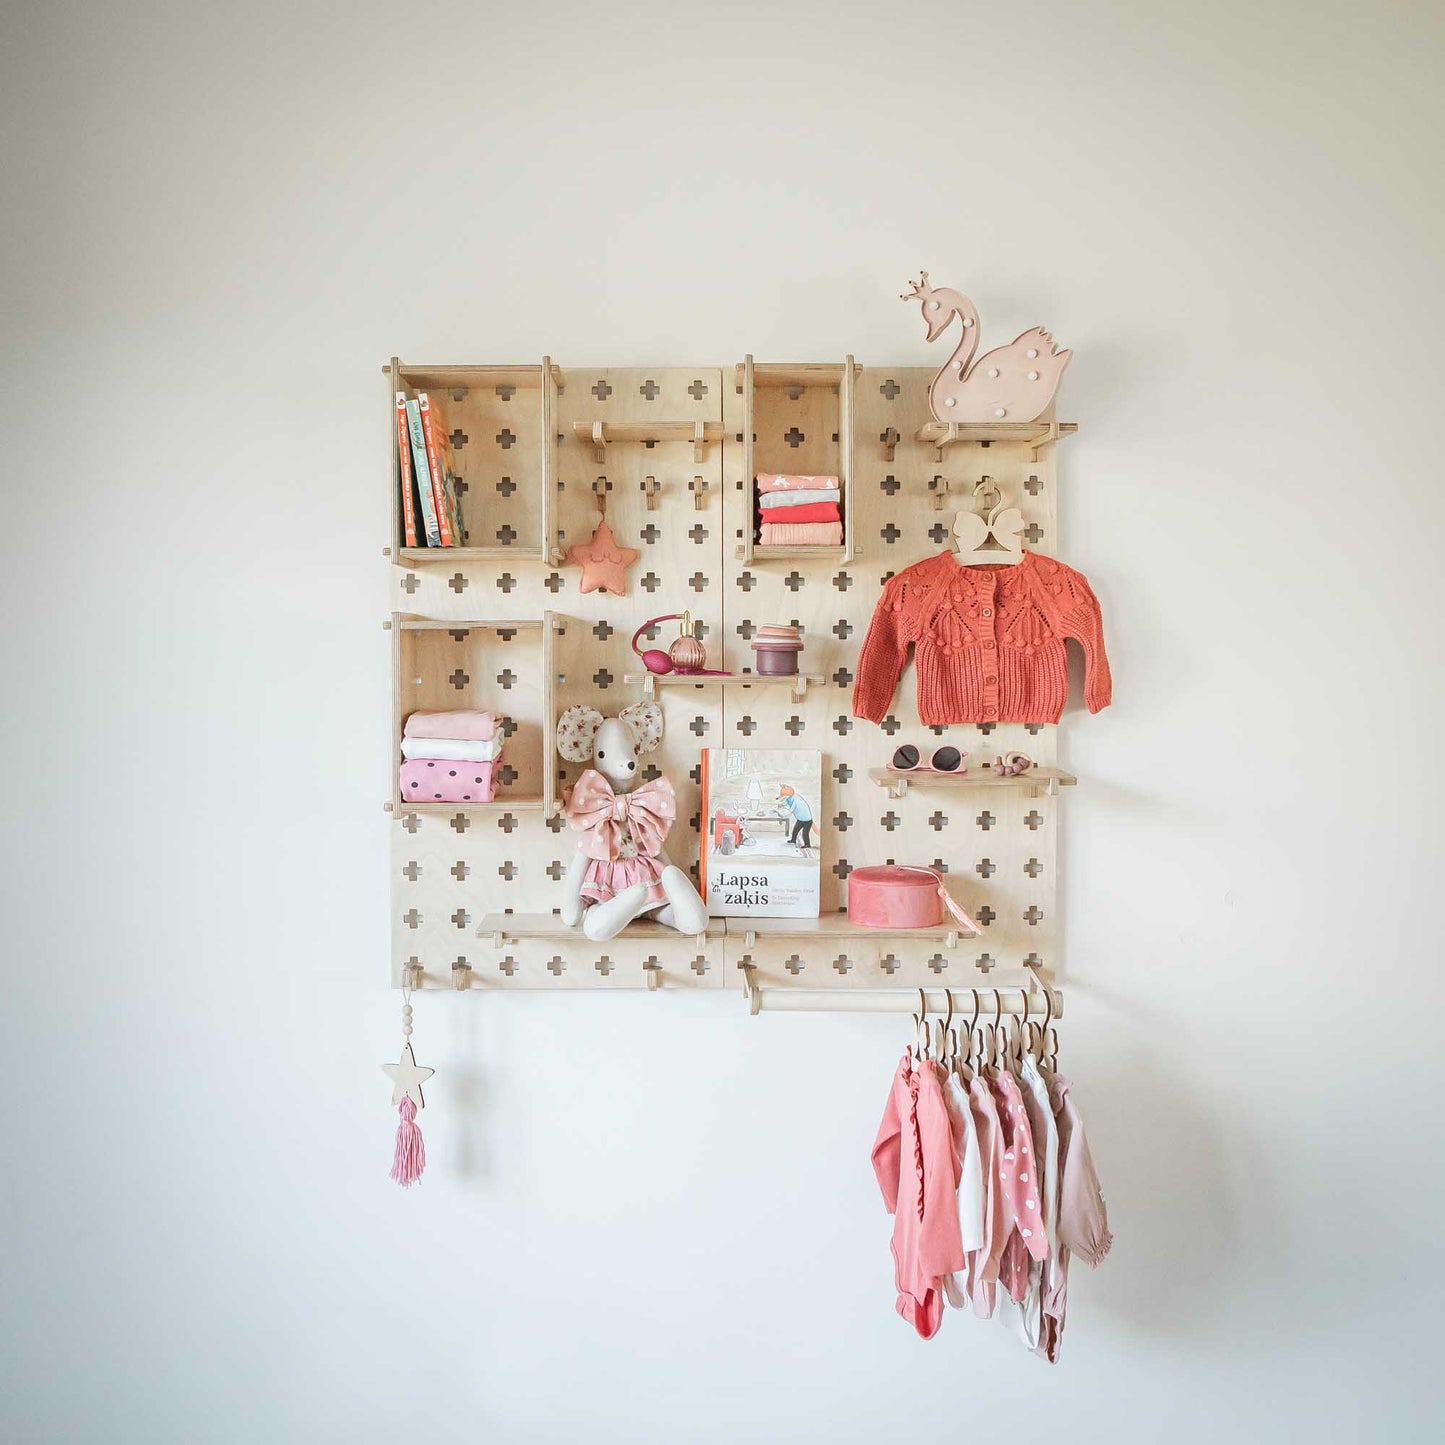 A Large Pegboard Shelf with Clothes Hanger from Sweet HOME from wood, with clothes and toys hanging on it.